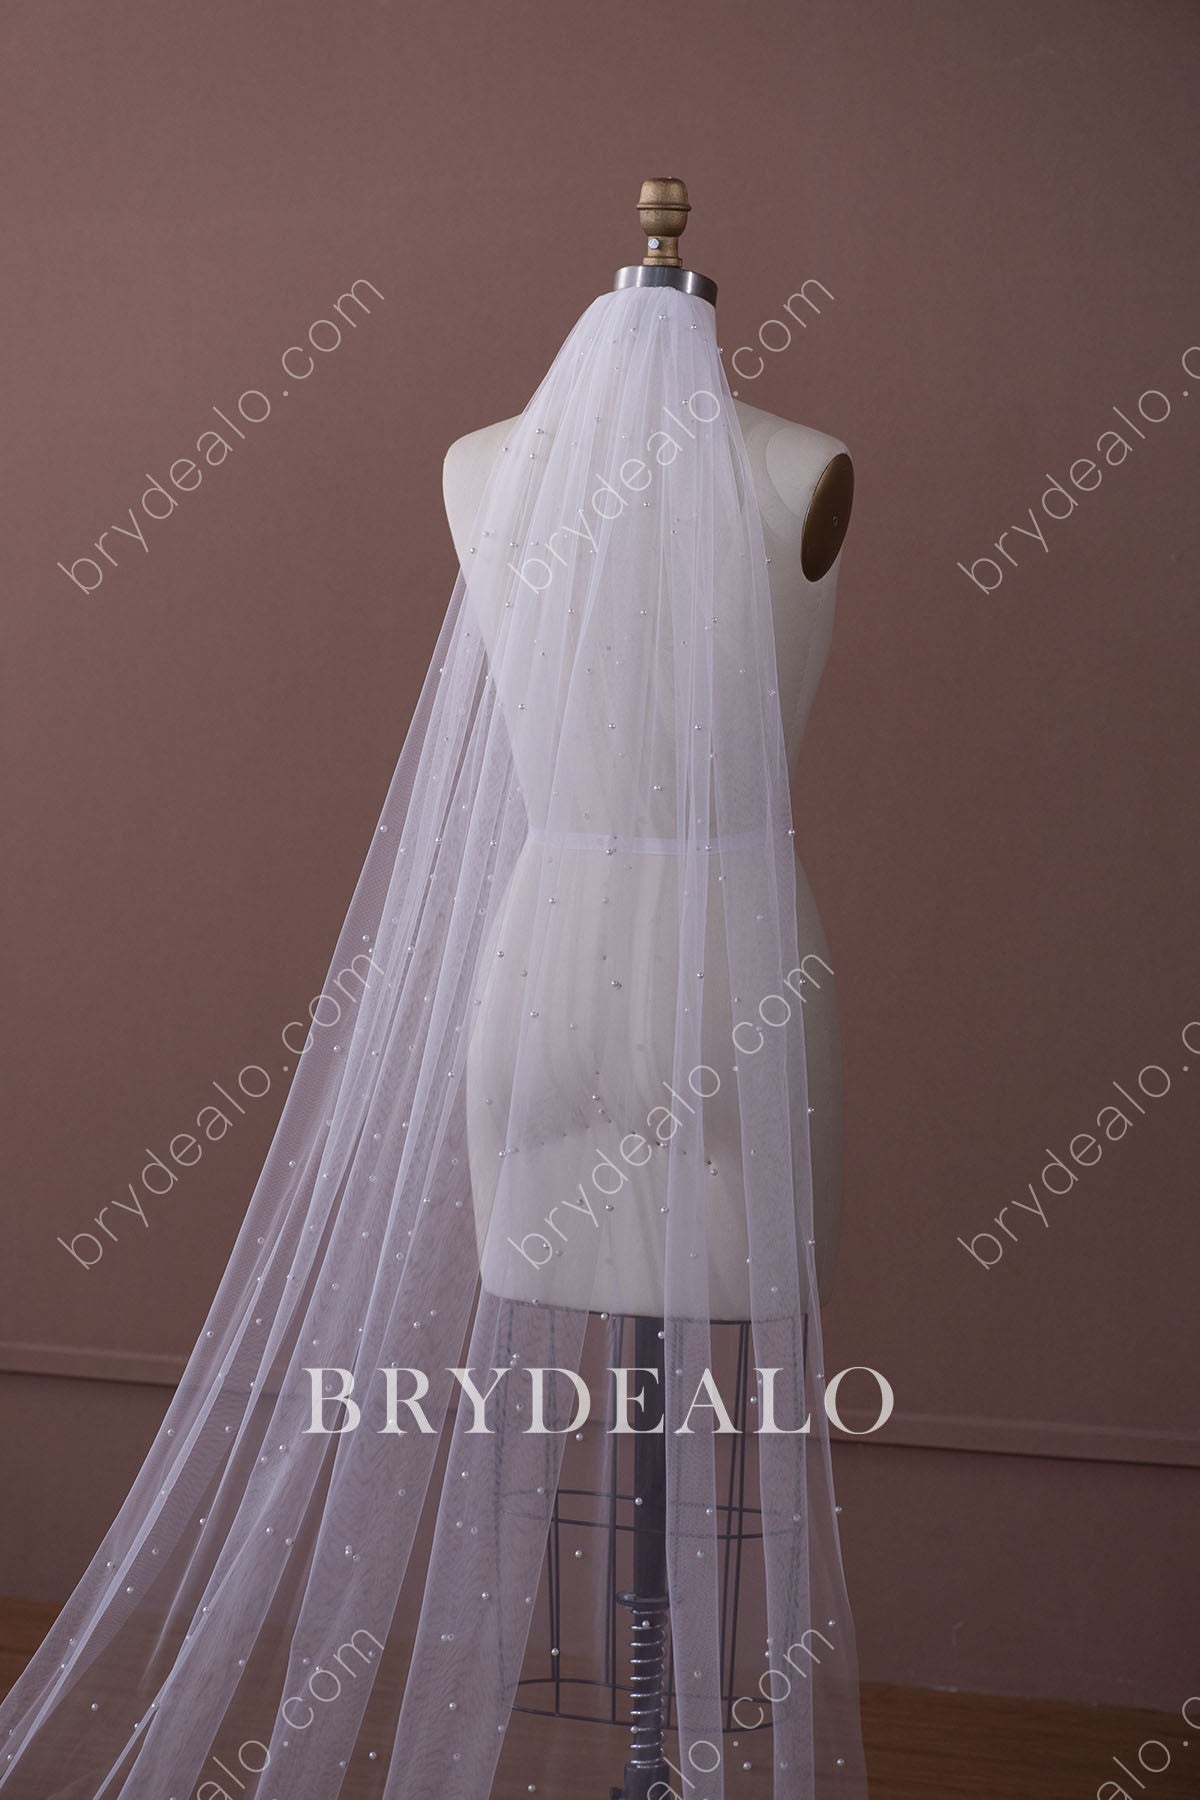 Chic Pearl Beaded Pearl Beaded Wedding Veils One Layer Long/Short Cathedral  Style For Elegant Wedding From Longyida55, $19.85